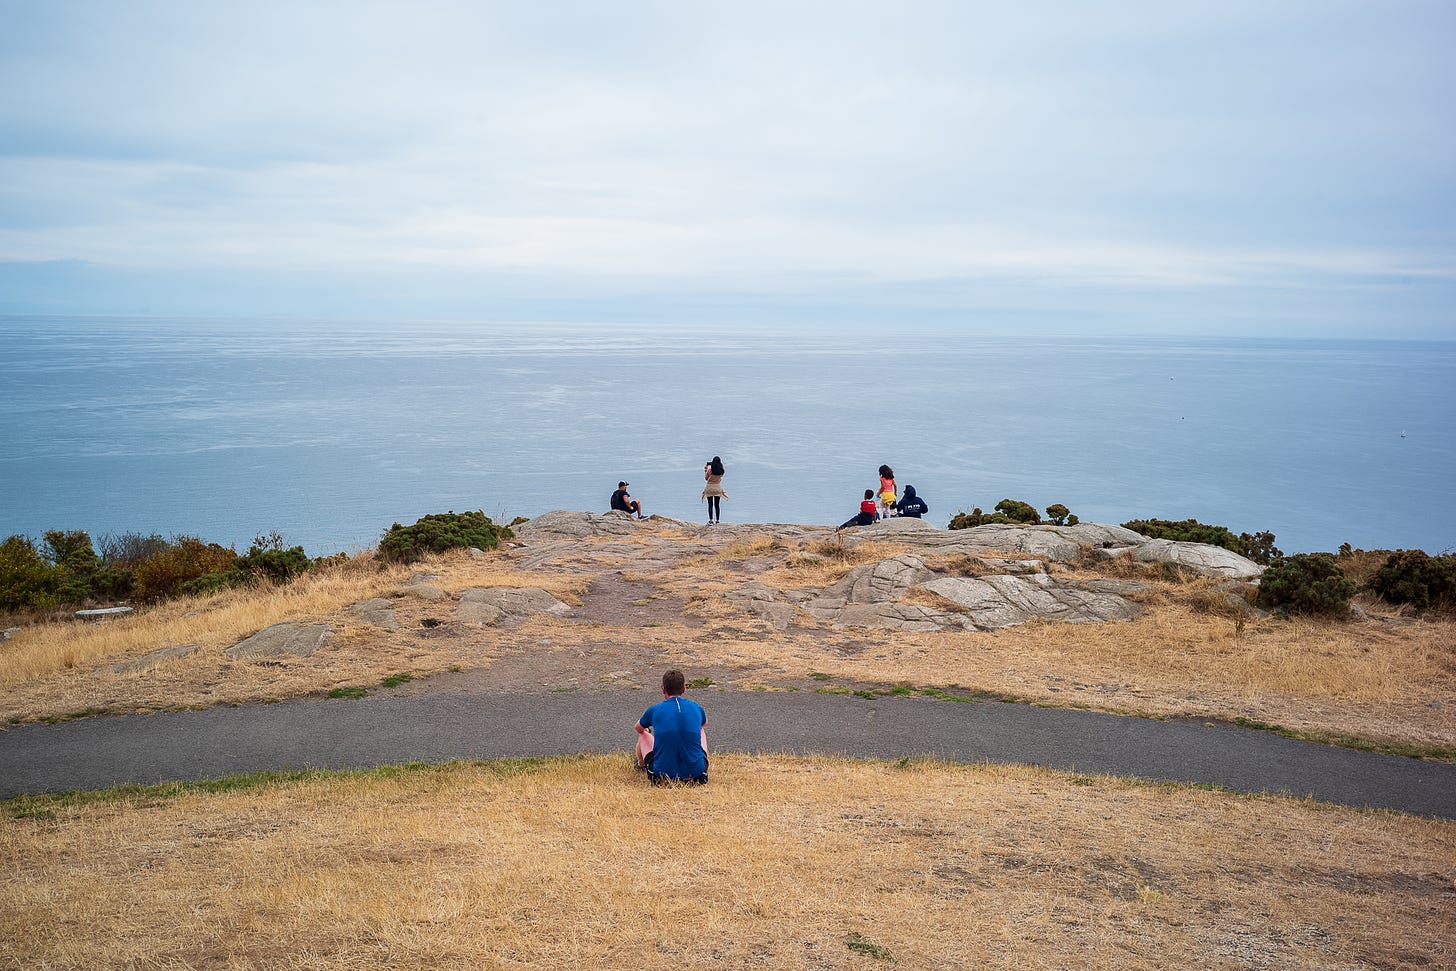 A sweaty runner wearing blue, with his back to the camera, and a few people in front of him, look out from a brown grass rocky hill over a water